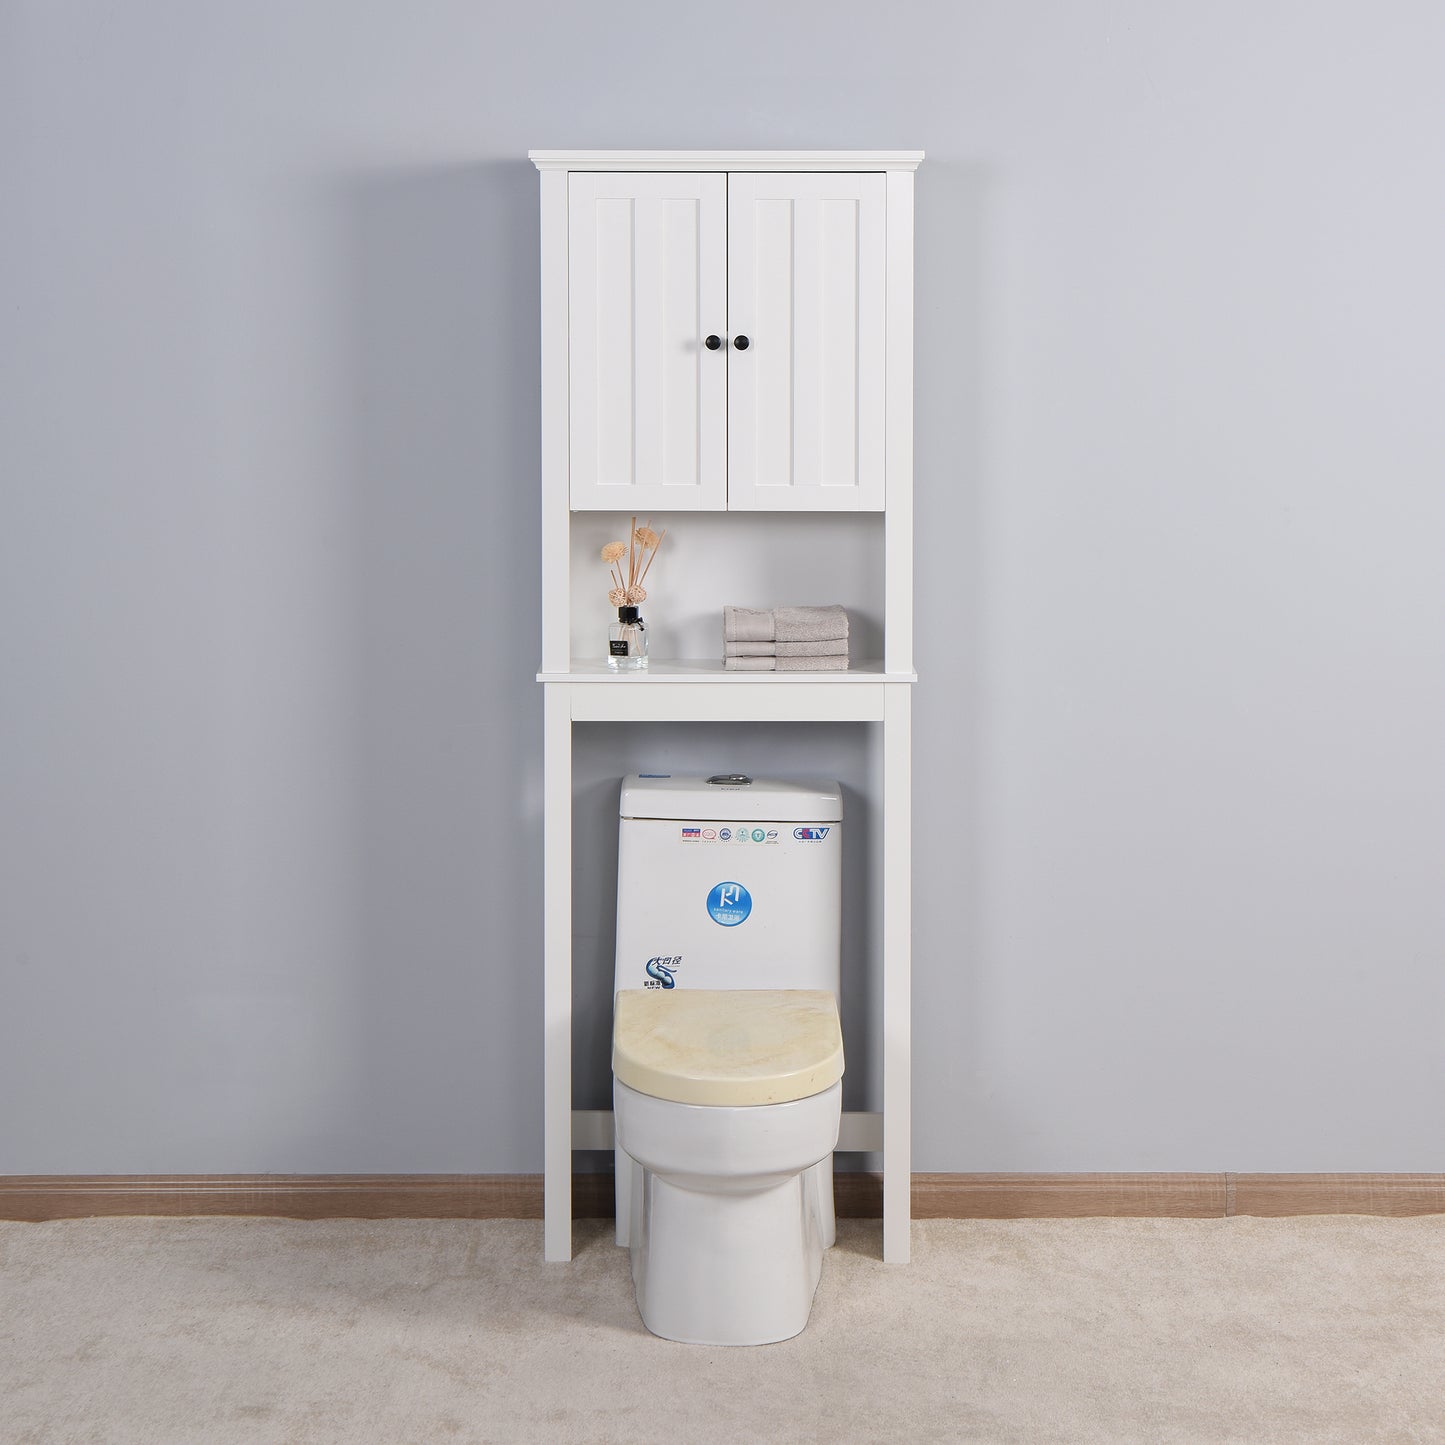 Bathroom Wooden Storage Cabinet Over-The-Toilet Space Saver with a Adjustable Shelf 23.62x7.72x67.32 inch